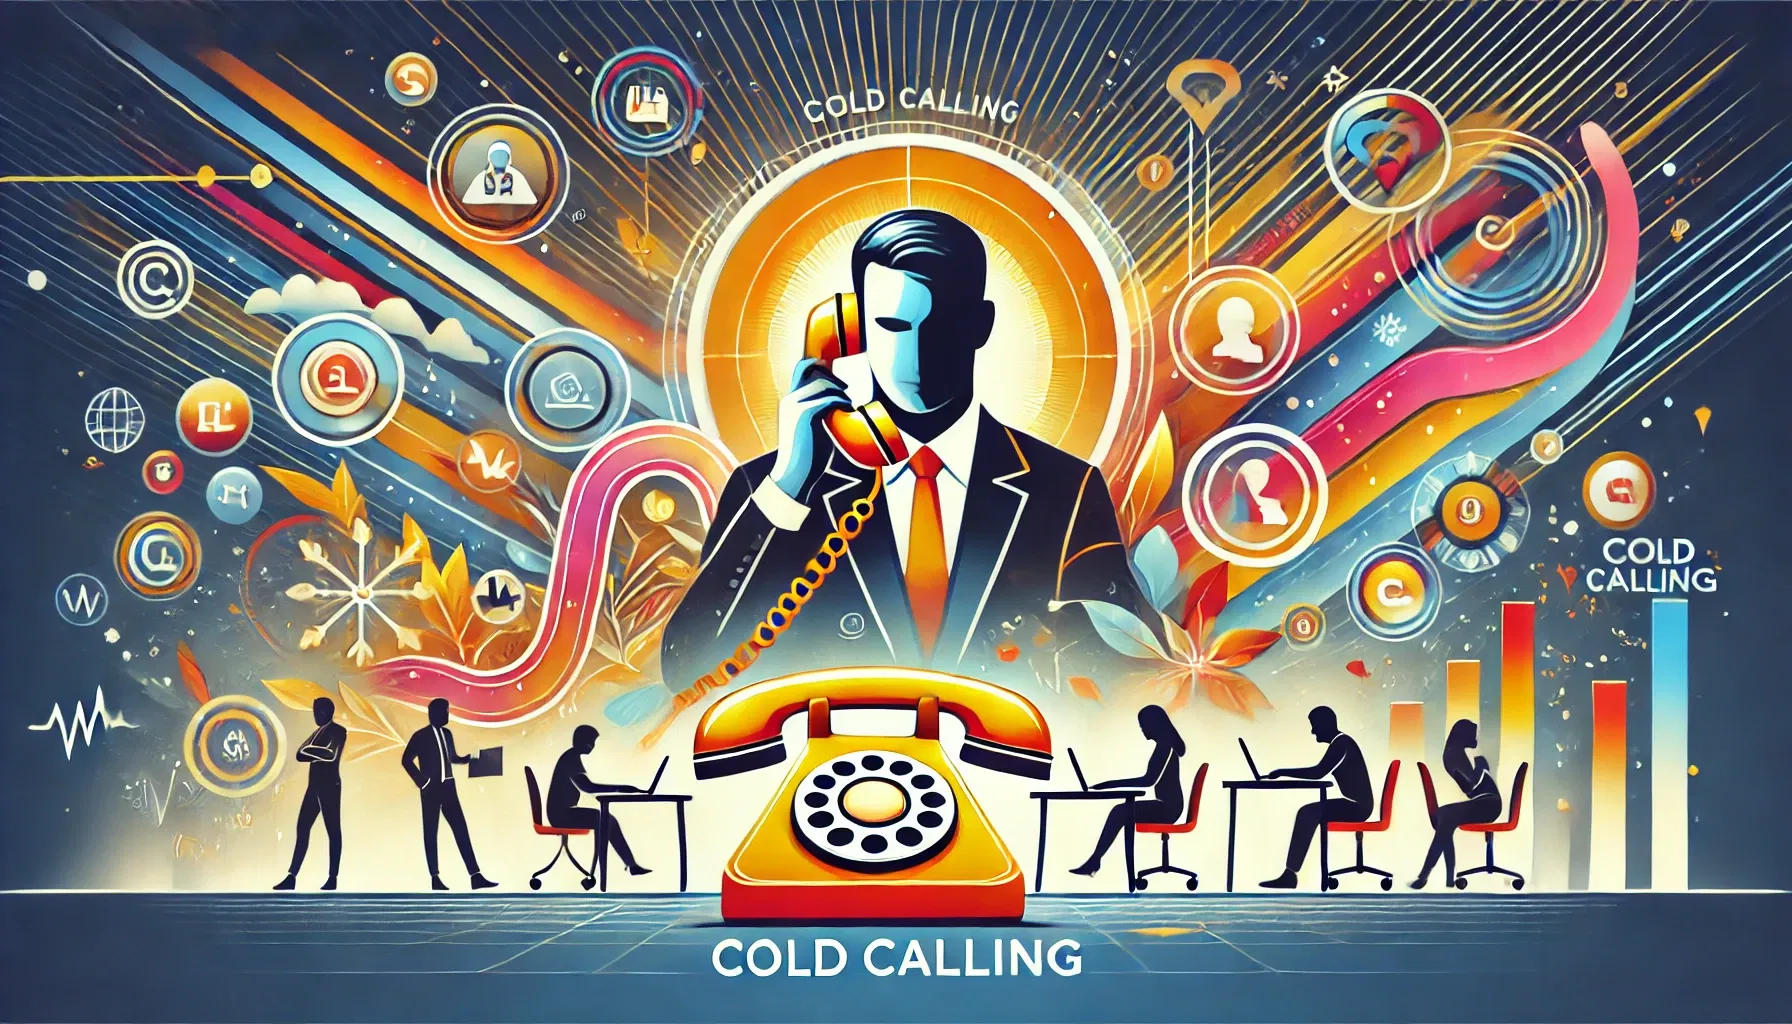 Dall·e 2024 06 24 17.00.20   a powerful and professional illustration focused on cold calling. show vibrant icons such as telephones, call symbols, and people making calls. includ